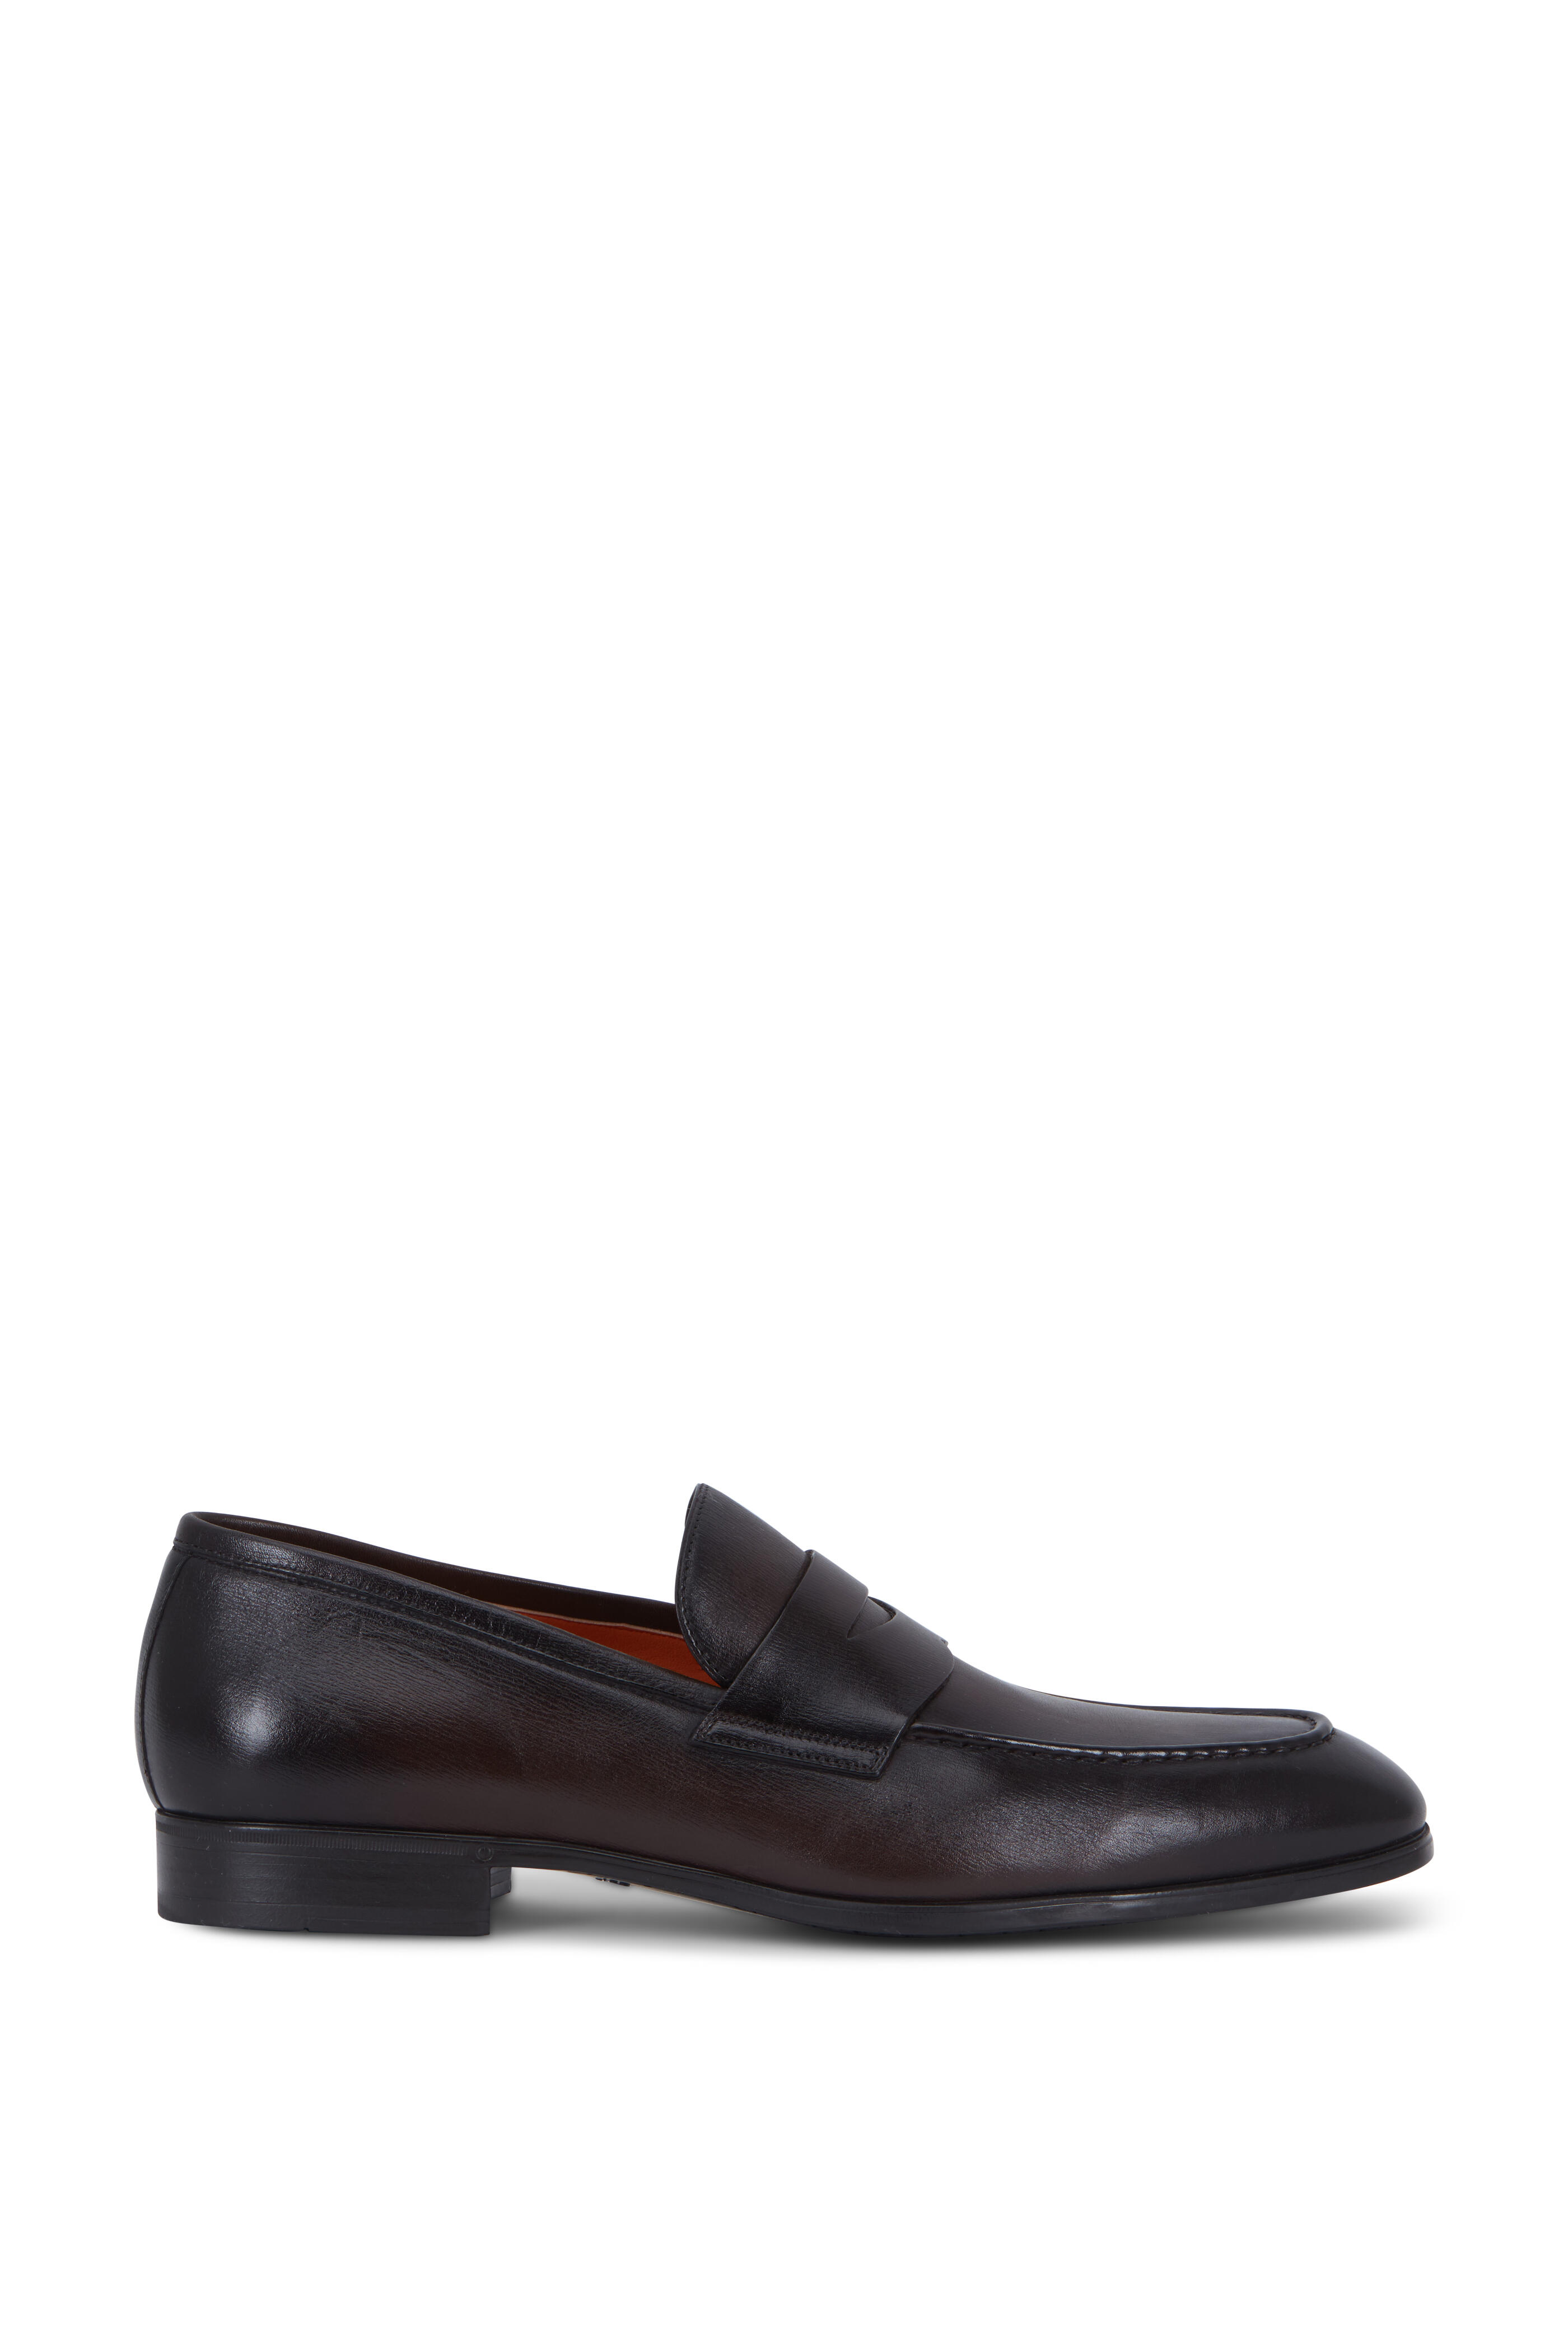 Santoni - Gavin Dark Brown Leather Penny Loafer | Mitchell Stores